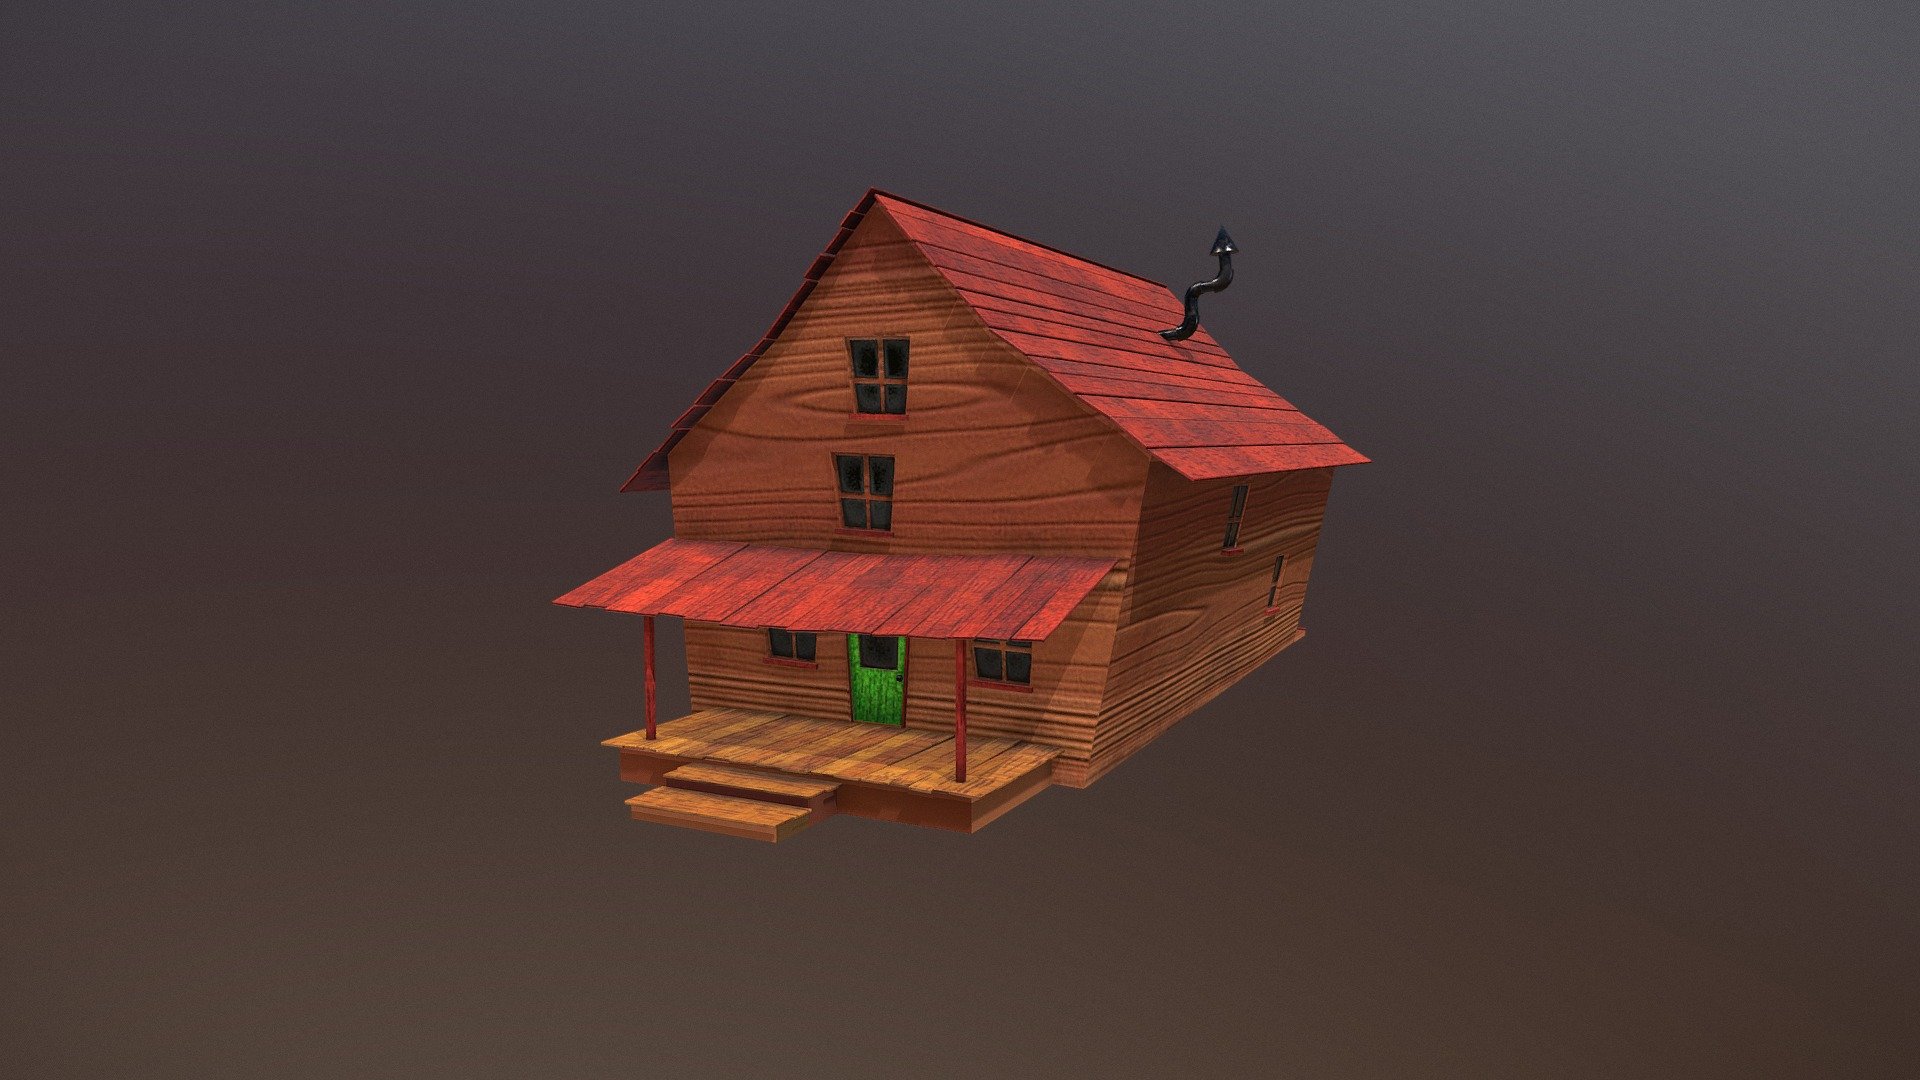 Bagge House from Courage the Cowardly Dog